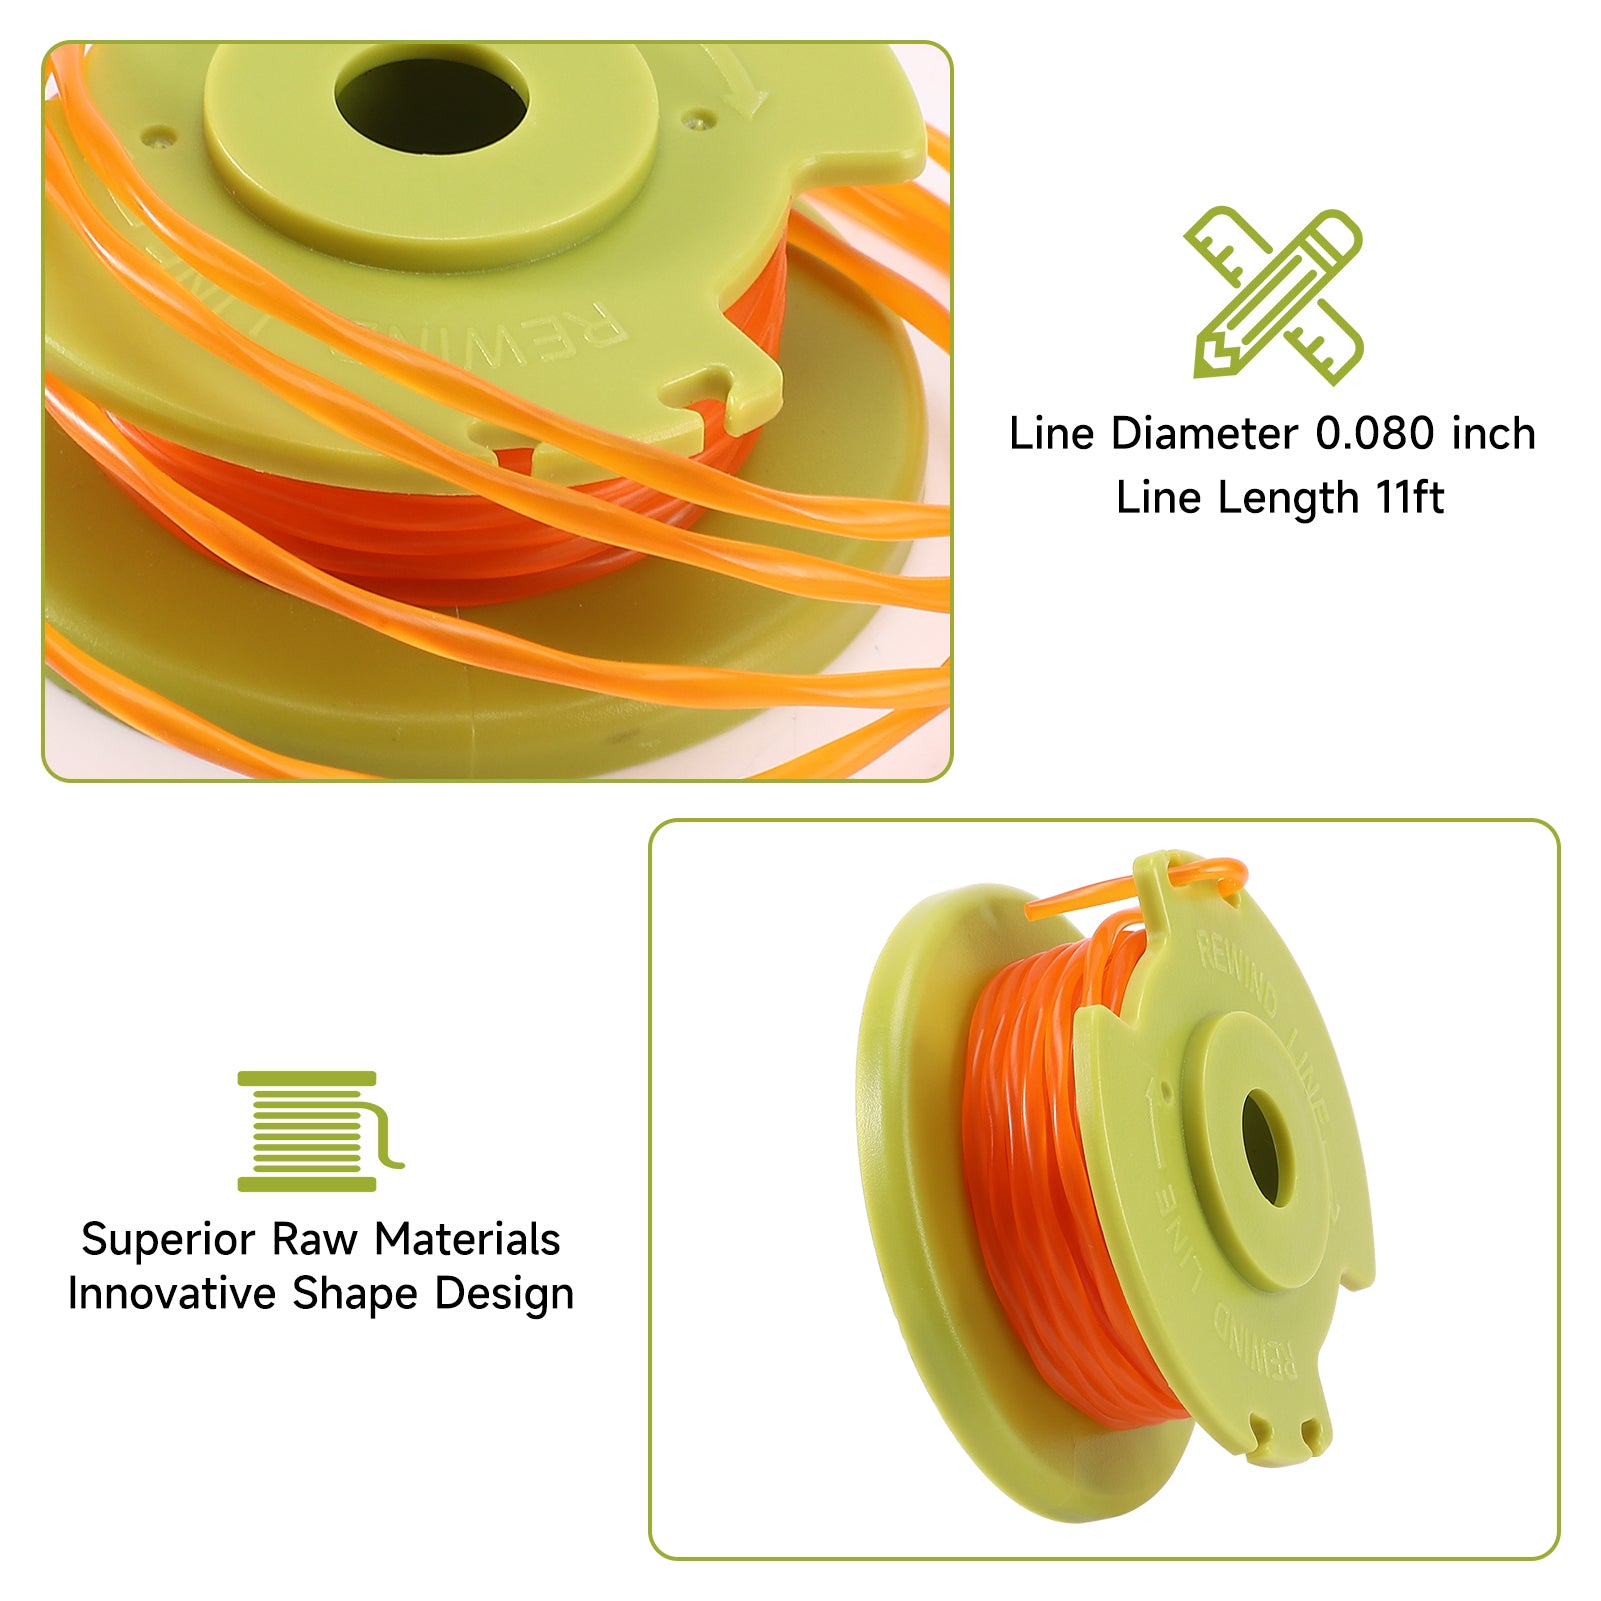 Trimmer Line Replacement Spool, Dual Line, .080-Inch